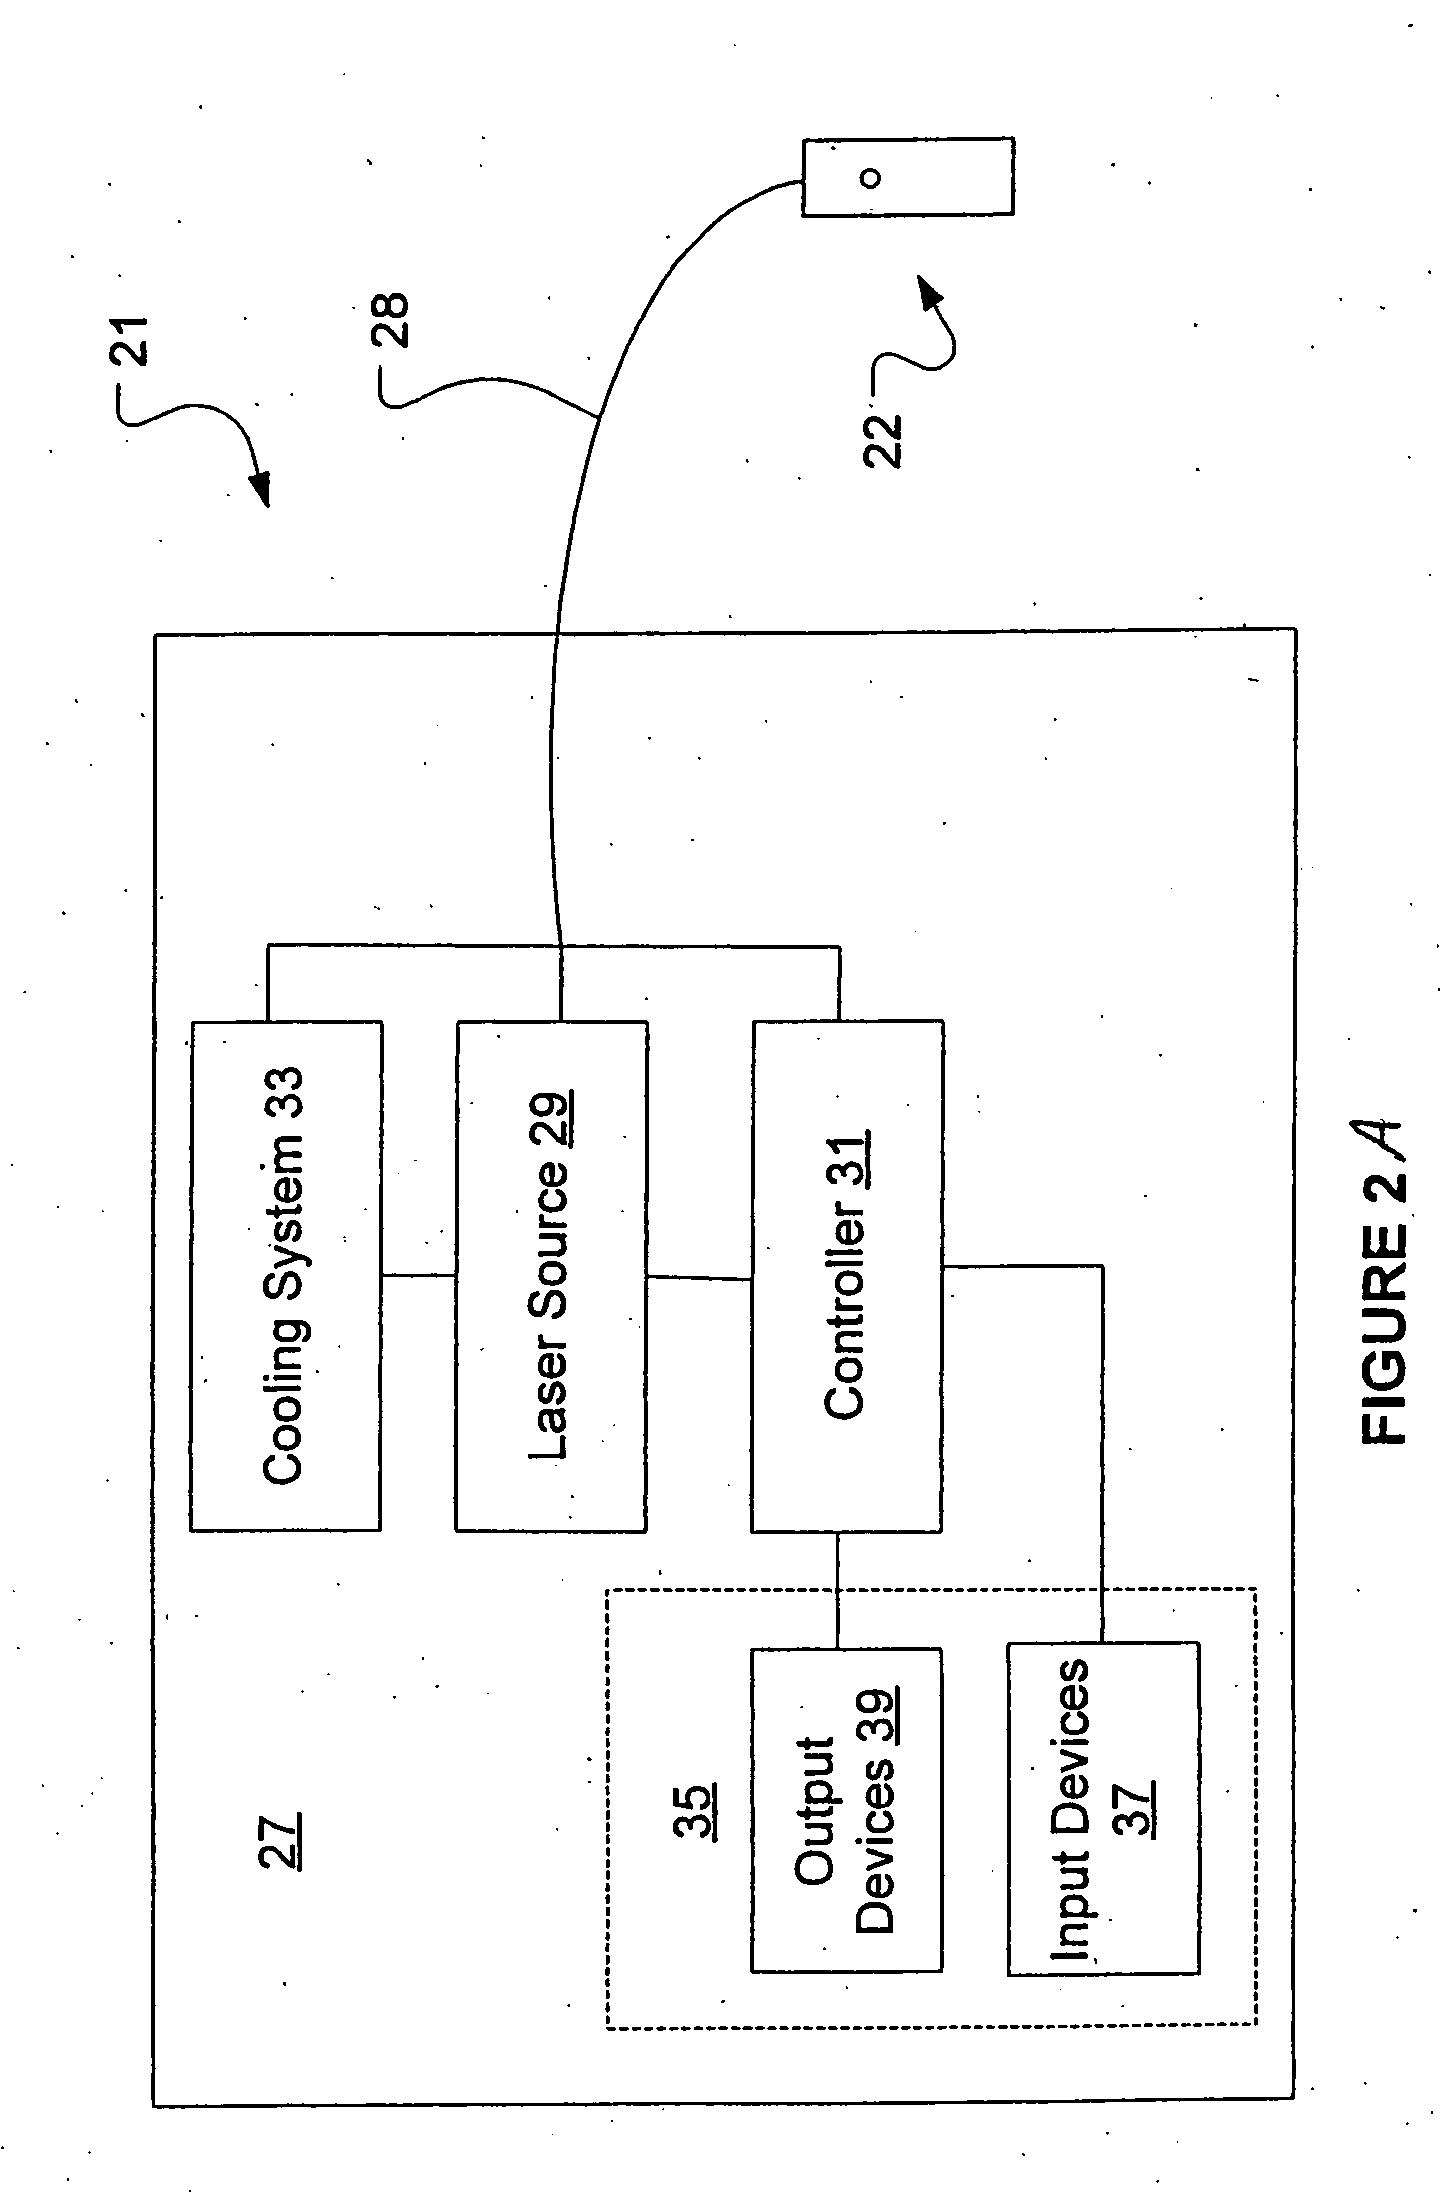 Methods and devices for non-ablative laser treatment of dermatologic conditions